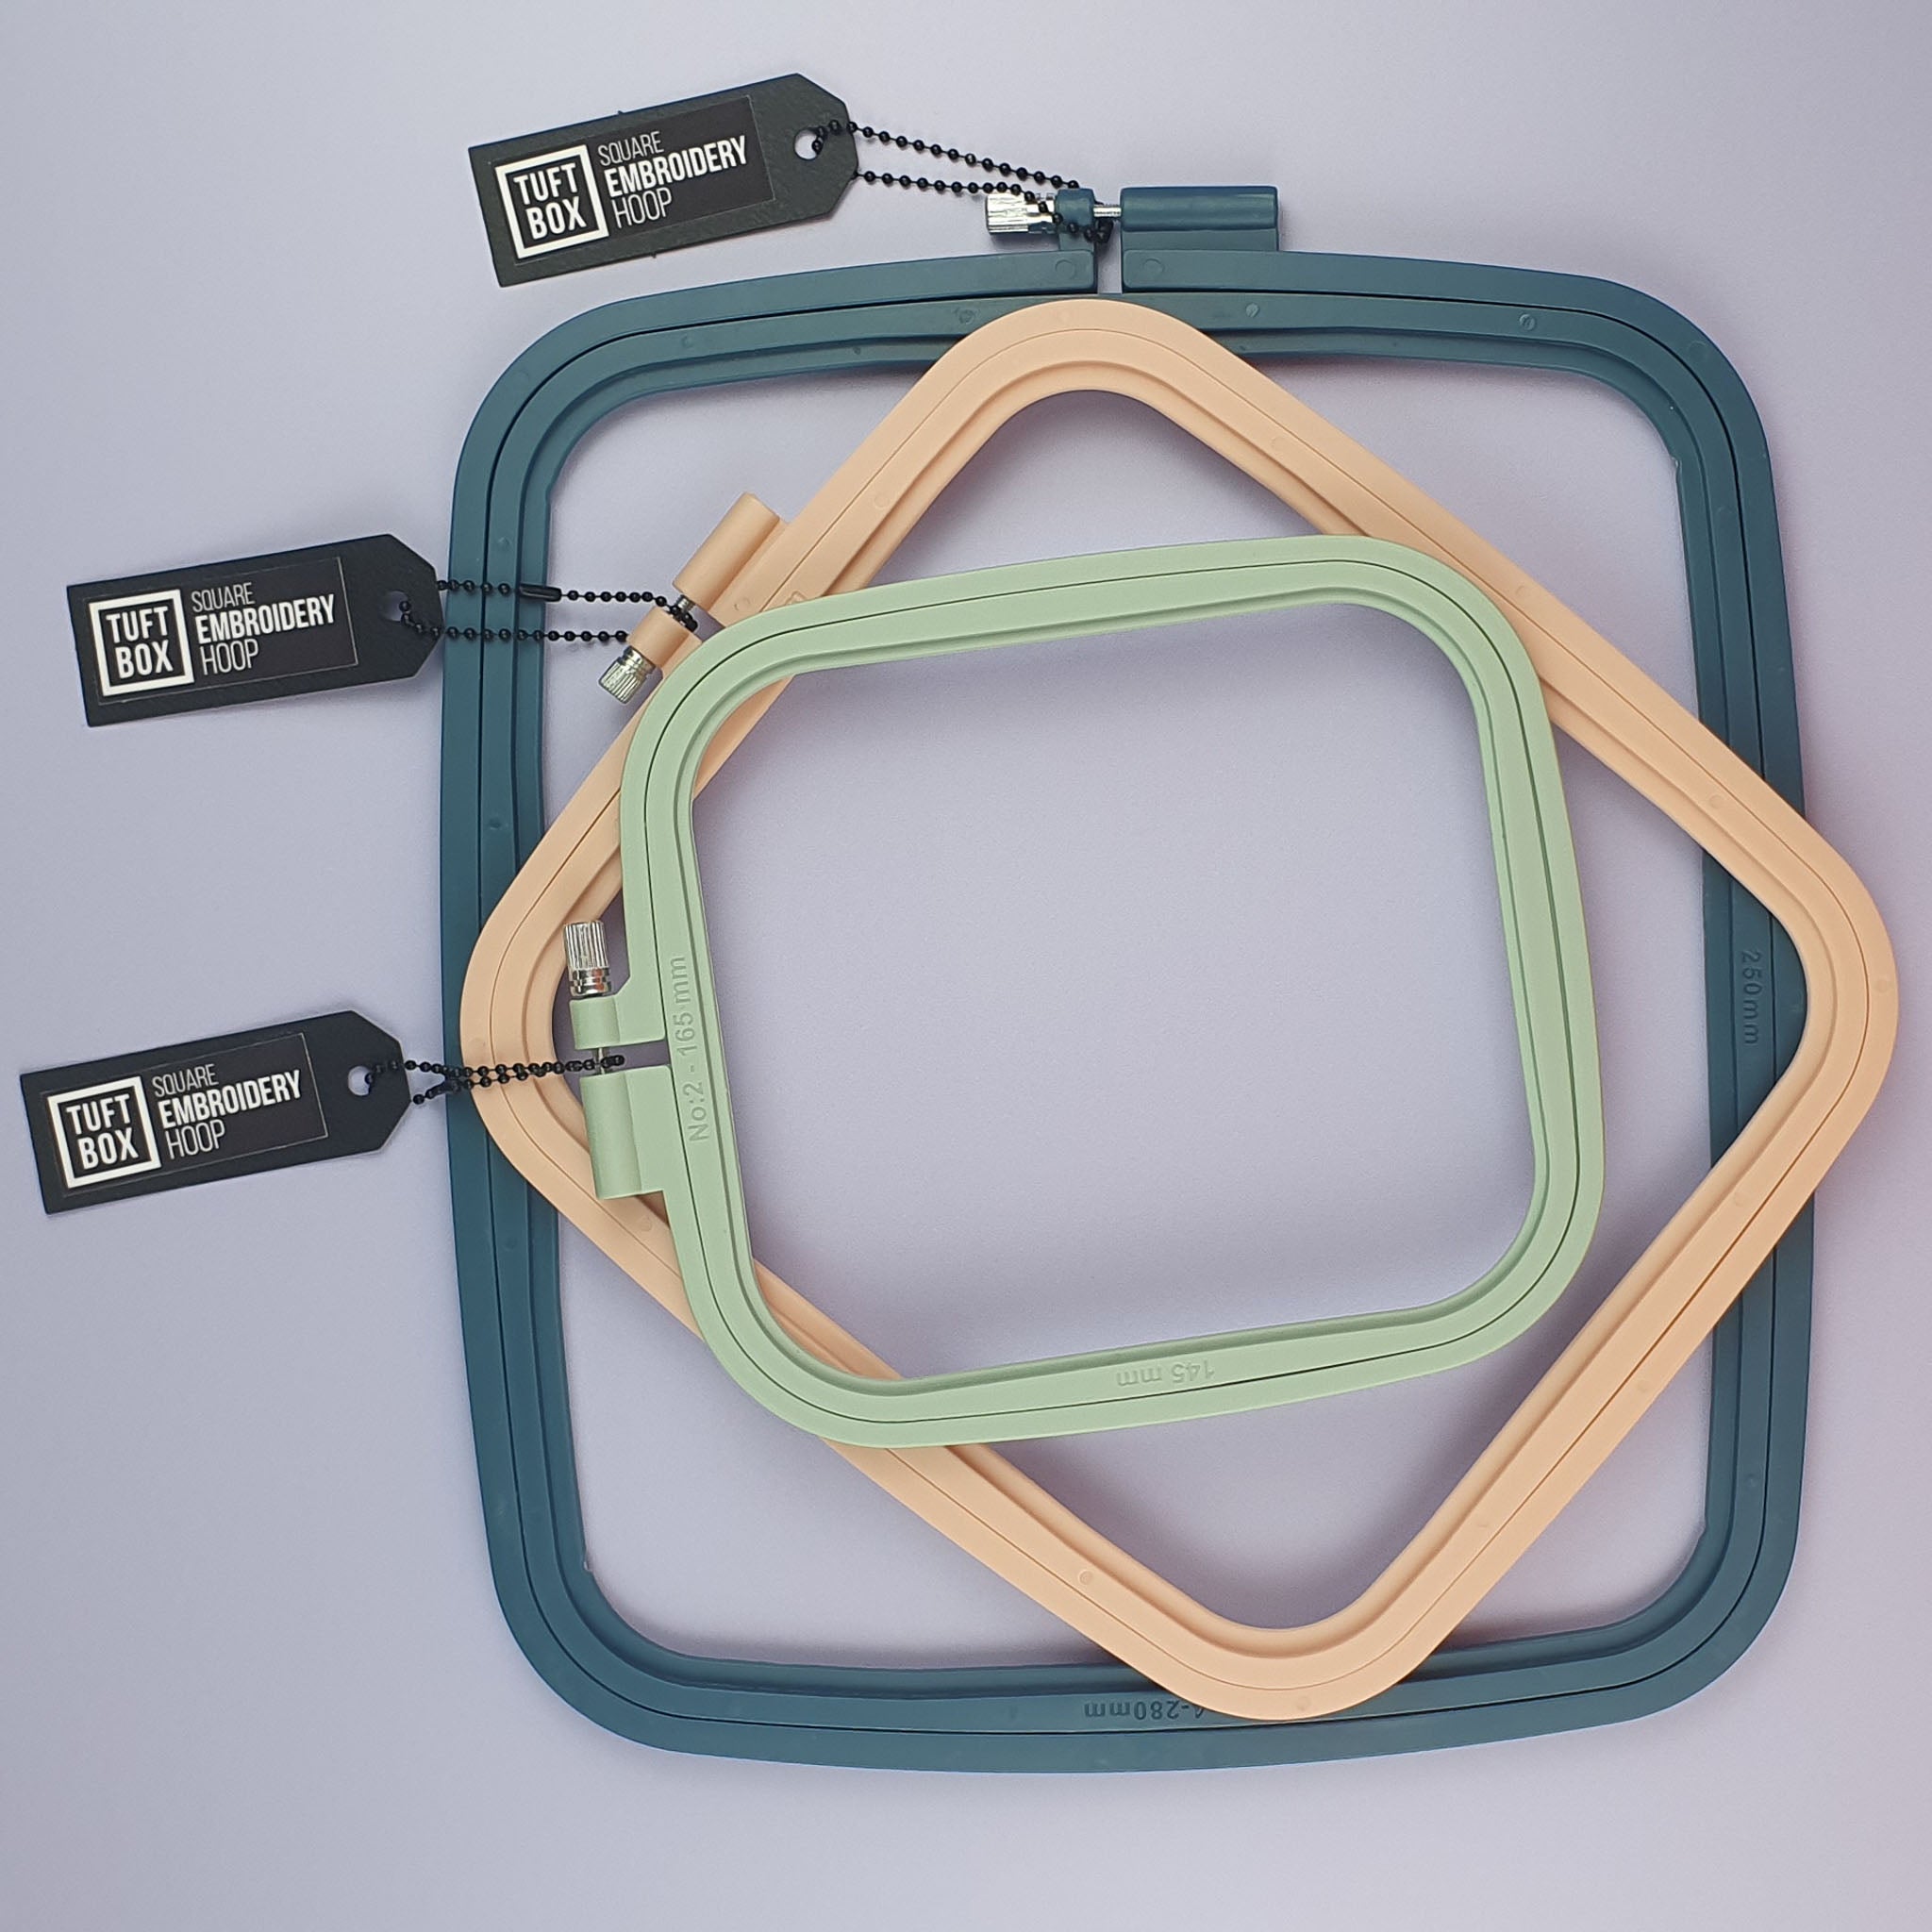 Embroidery Hoop Square Navy Cream and Green Hoops Stacked